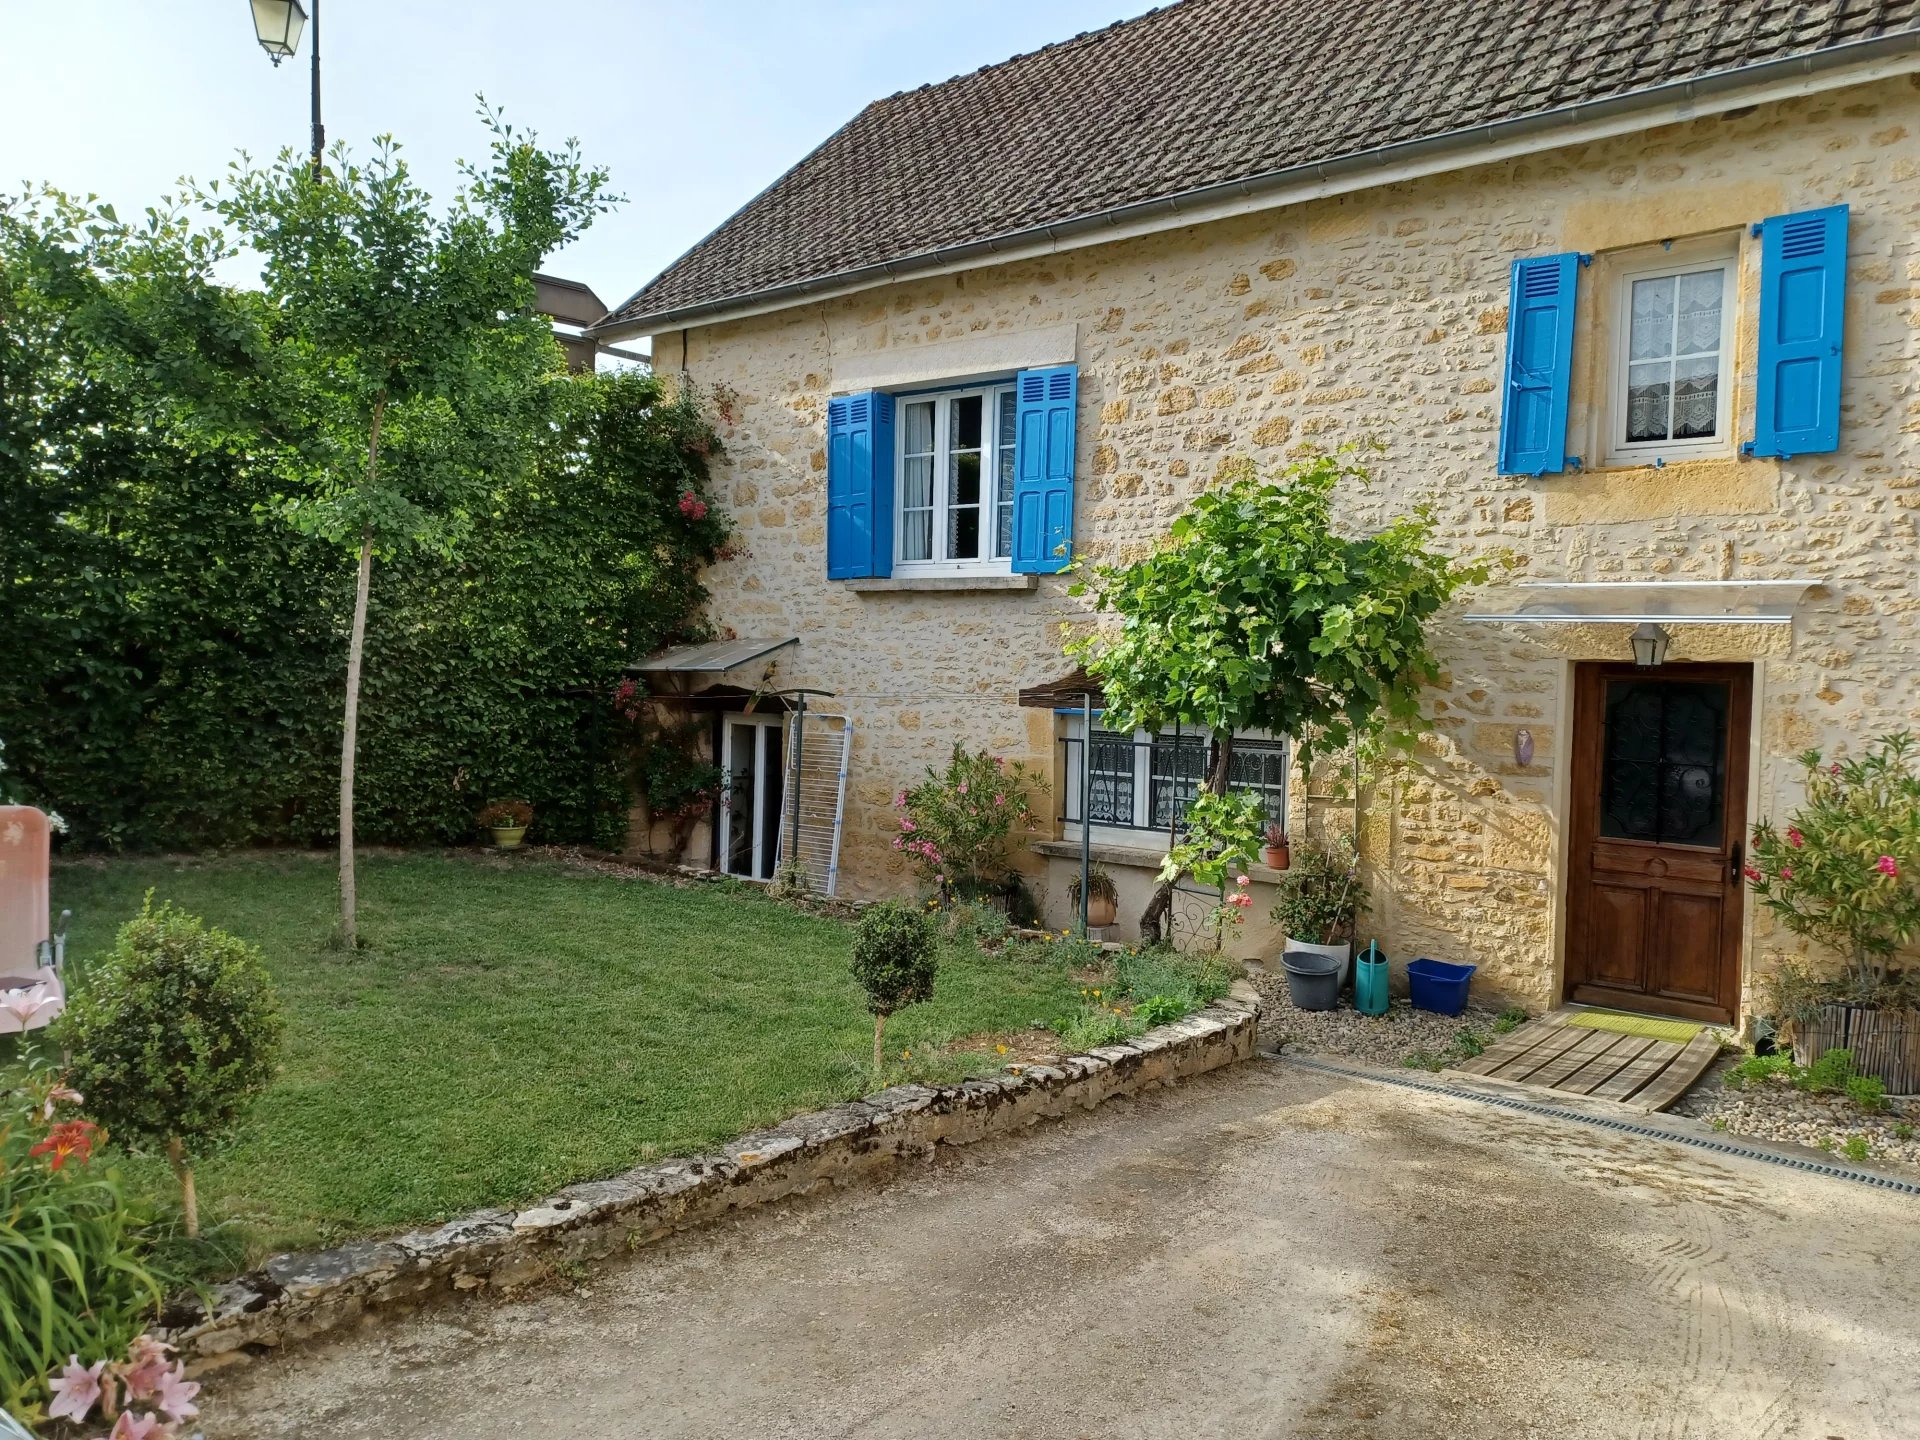 Cottage with separate annex offering lots of living space and potential ...minutes from the Dordogne river.